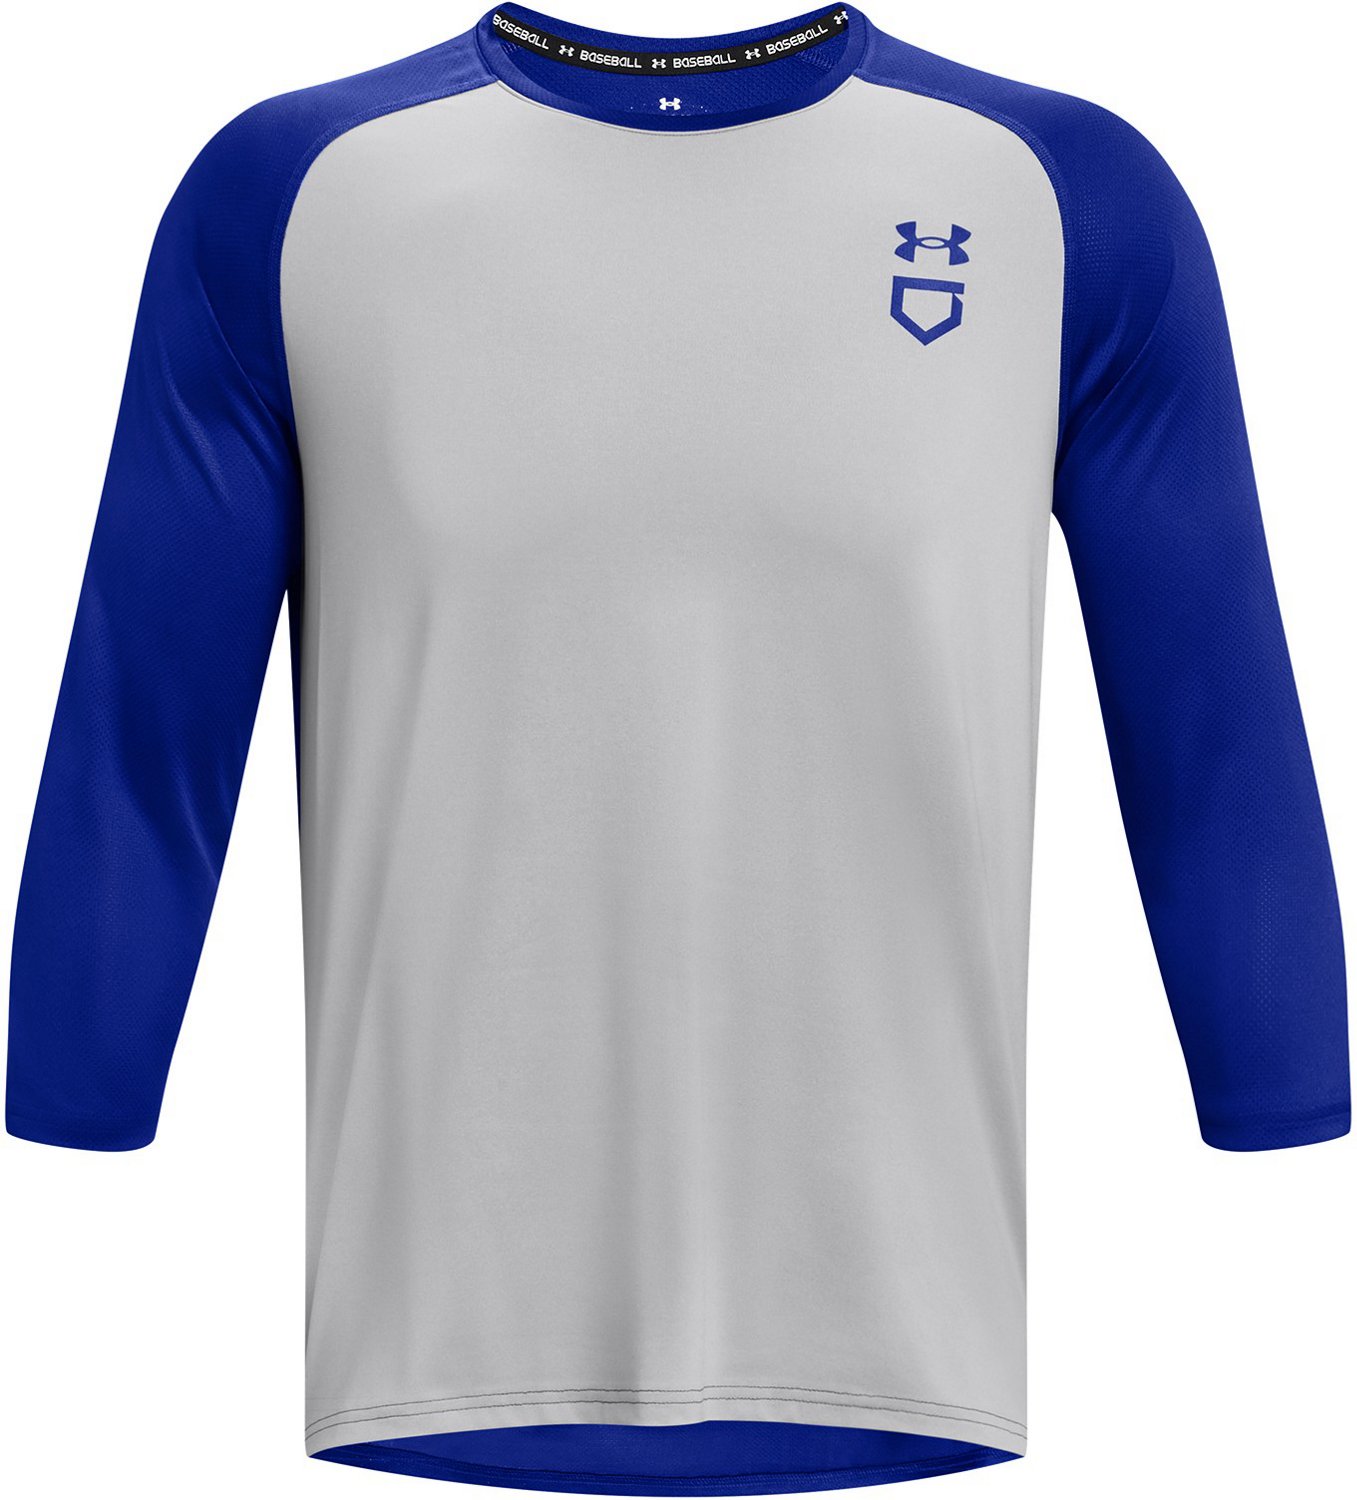 Under Armour Mens Utility Performance 3/4 Sleeve T-shirt